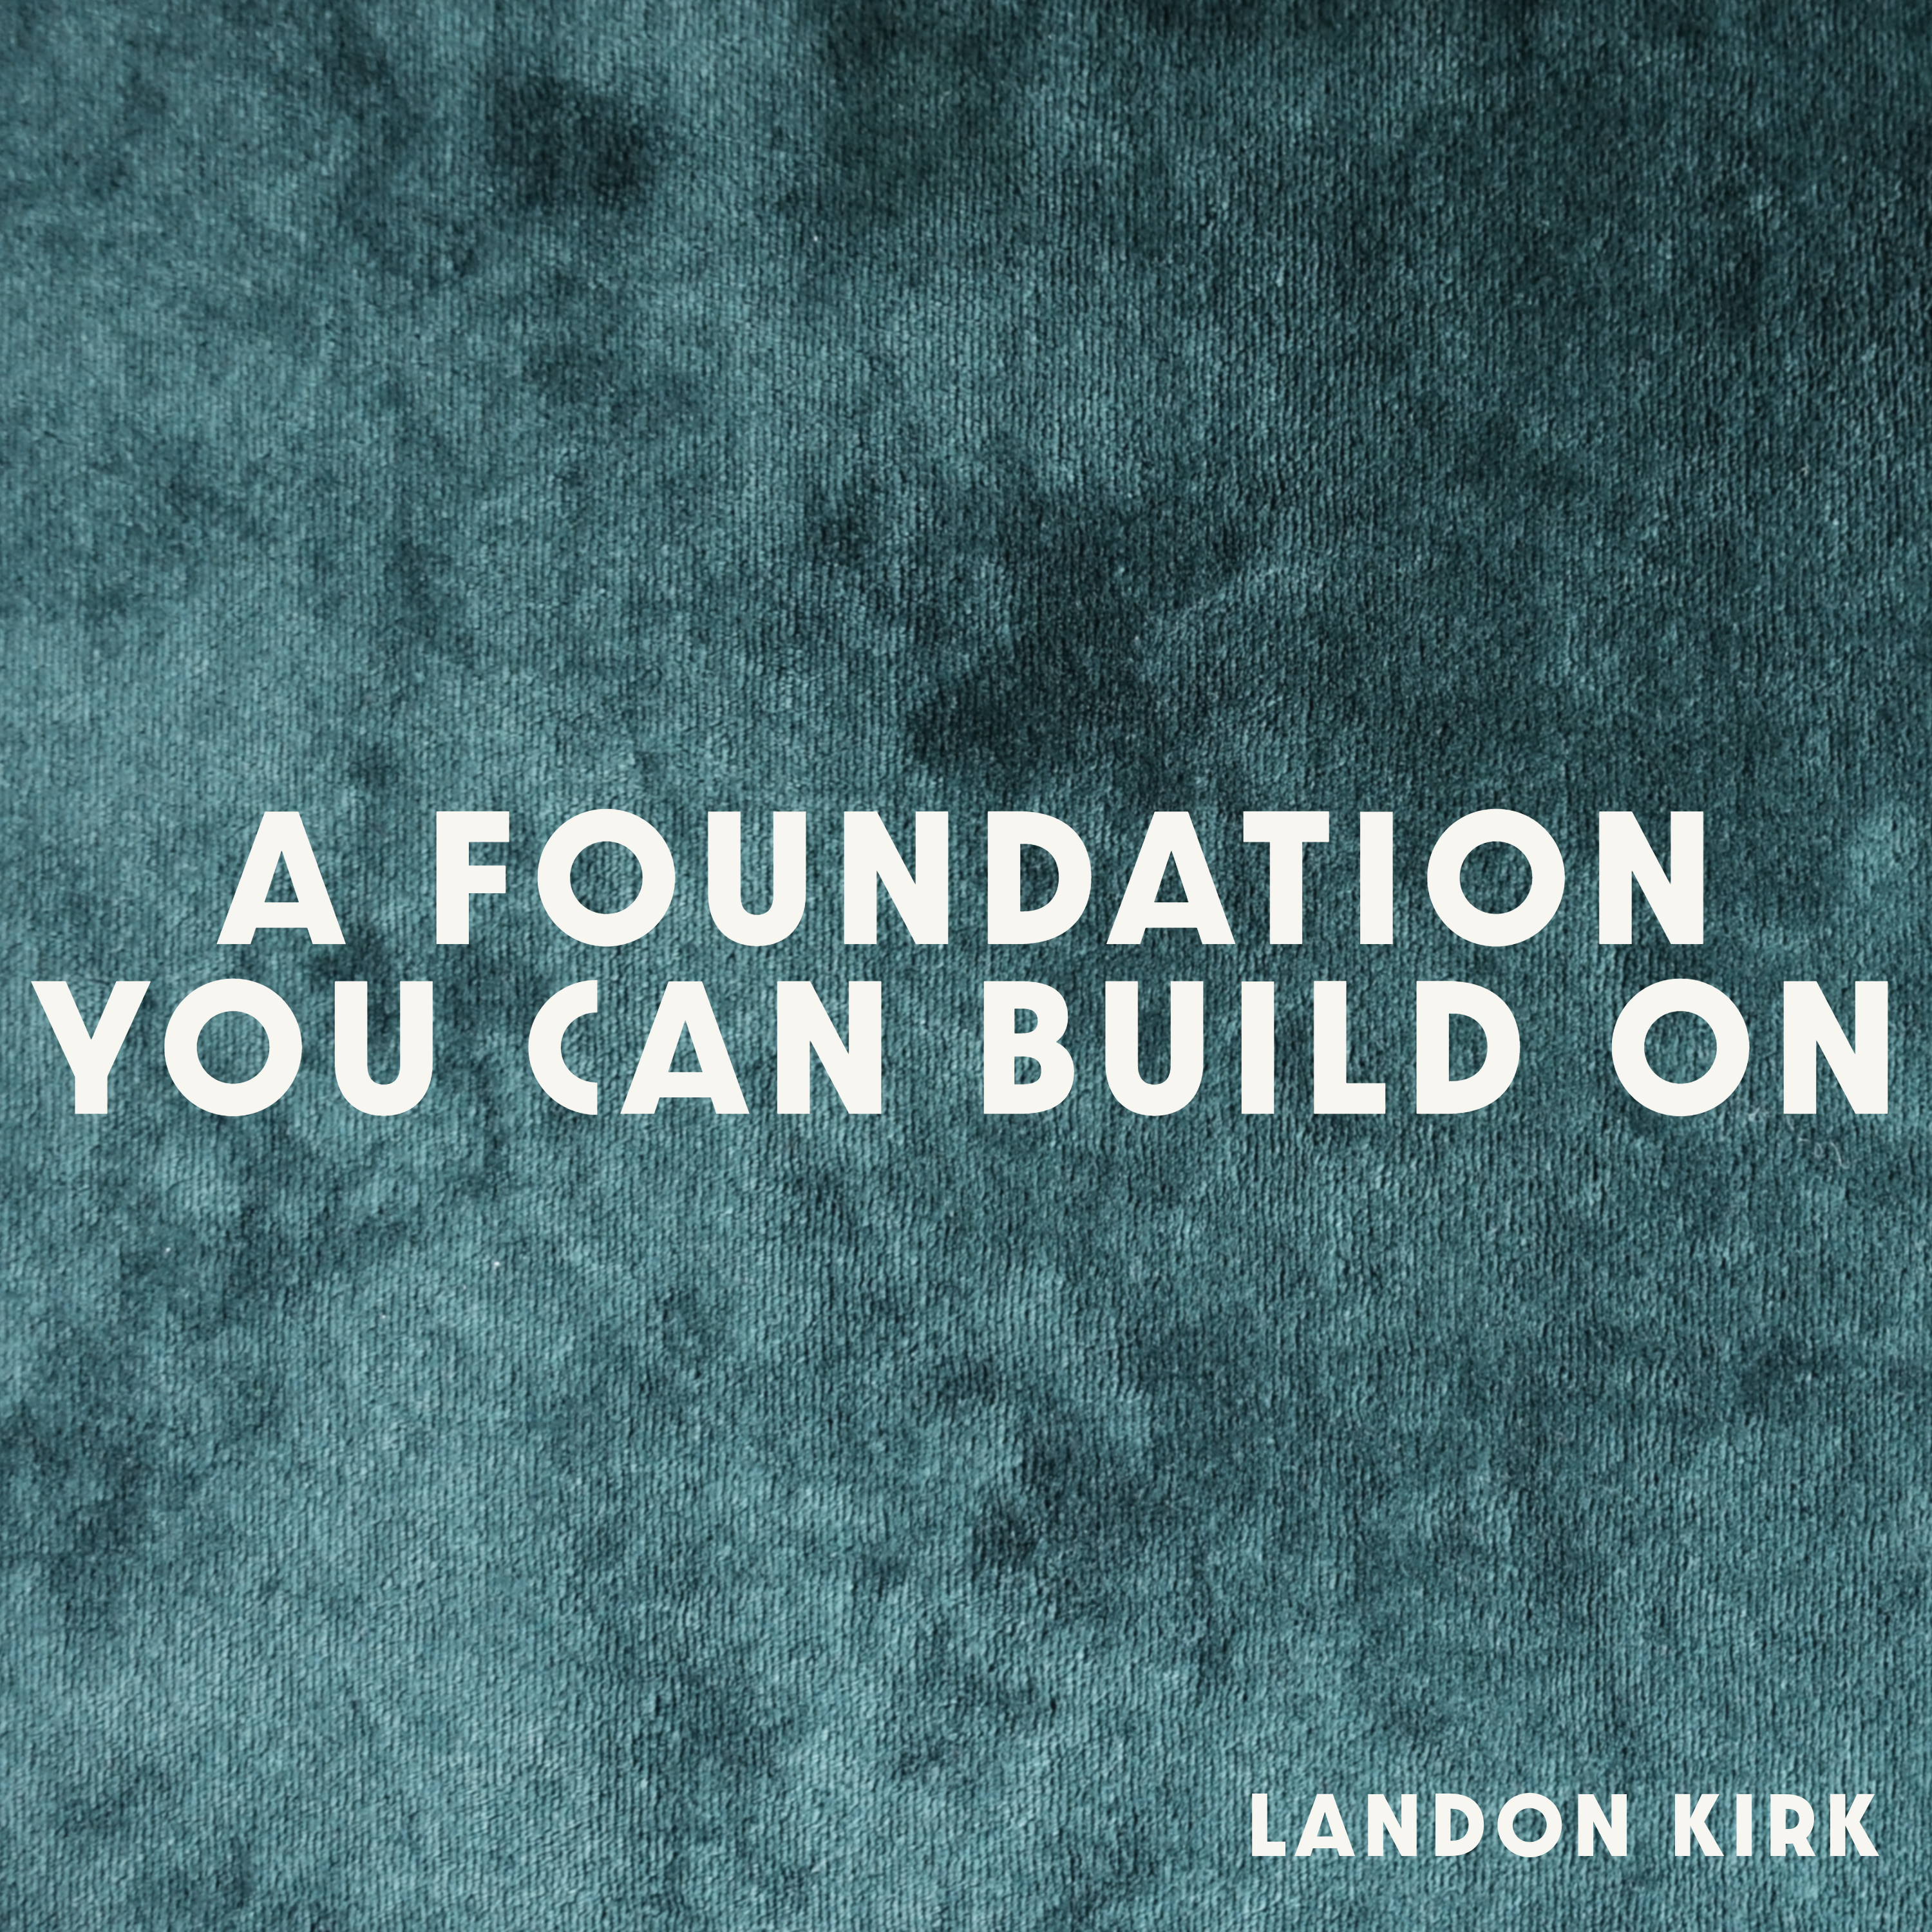 A Foundation You Can Build On